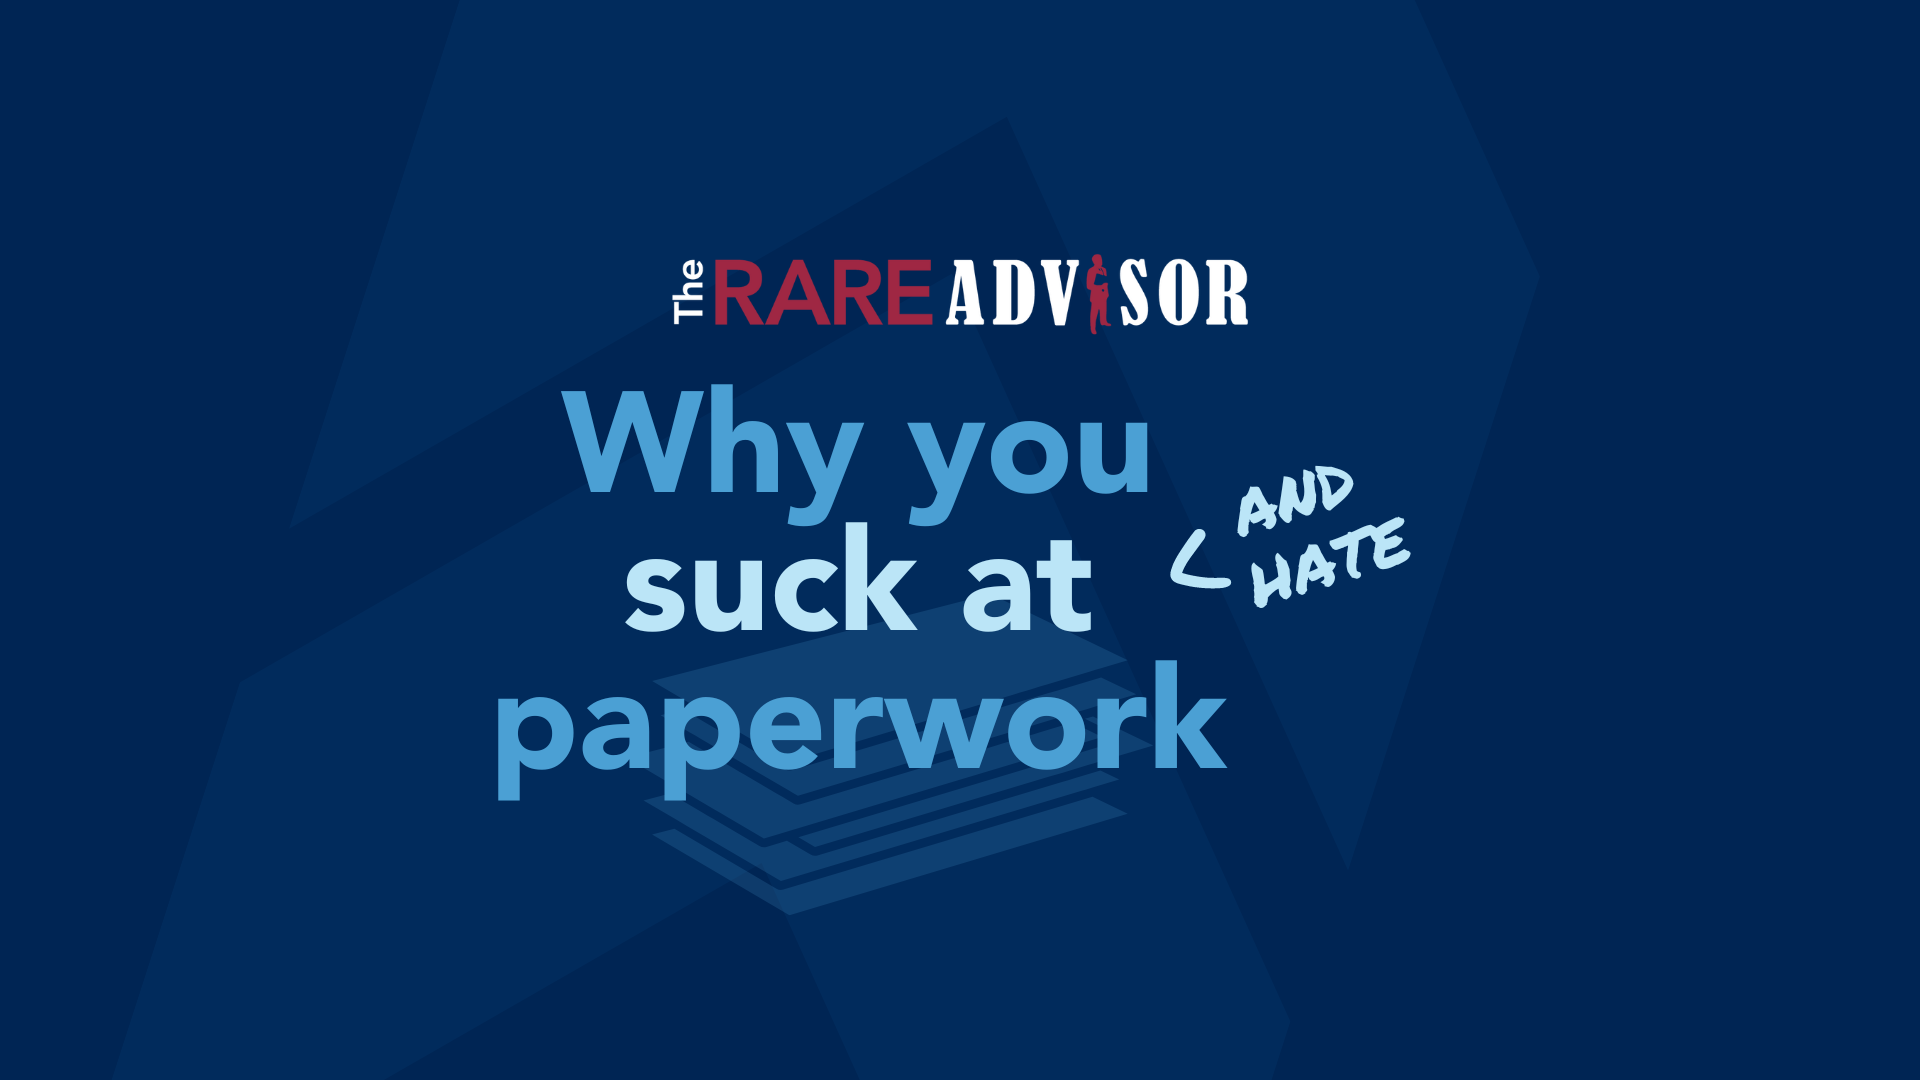 The RARE Advisor: Why You Suck At (and Hate) Paperwork